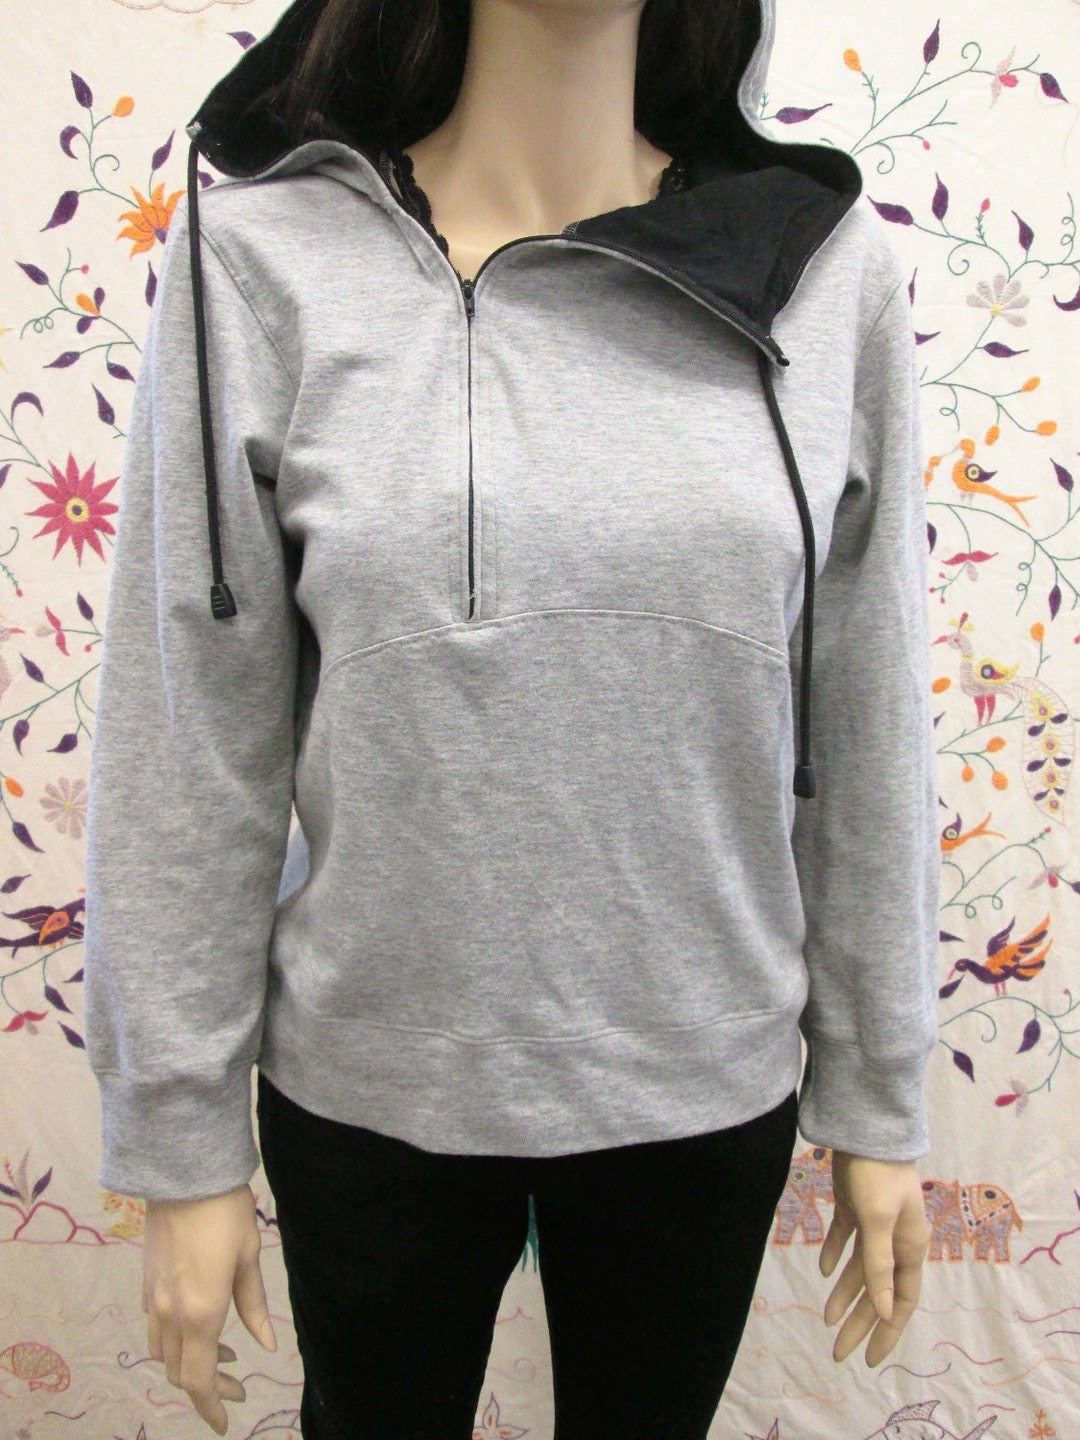 EMF BLOCKING HOODIE Woven With Silver to Prevent Dna Damage - Etsy